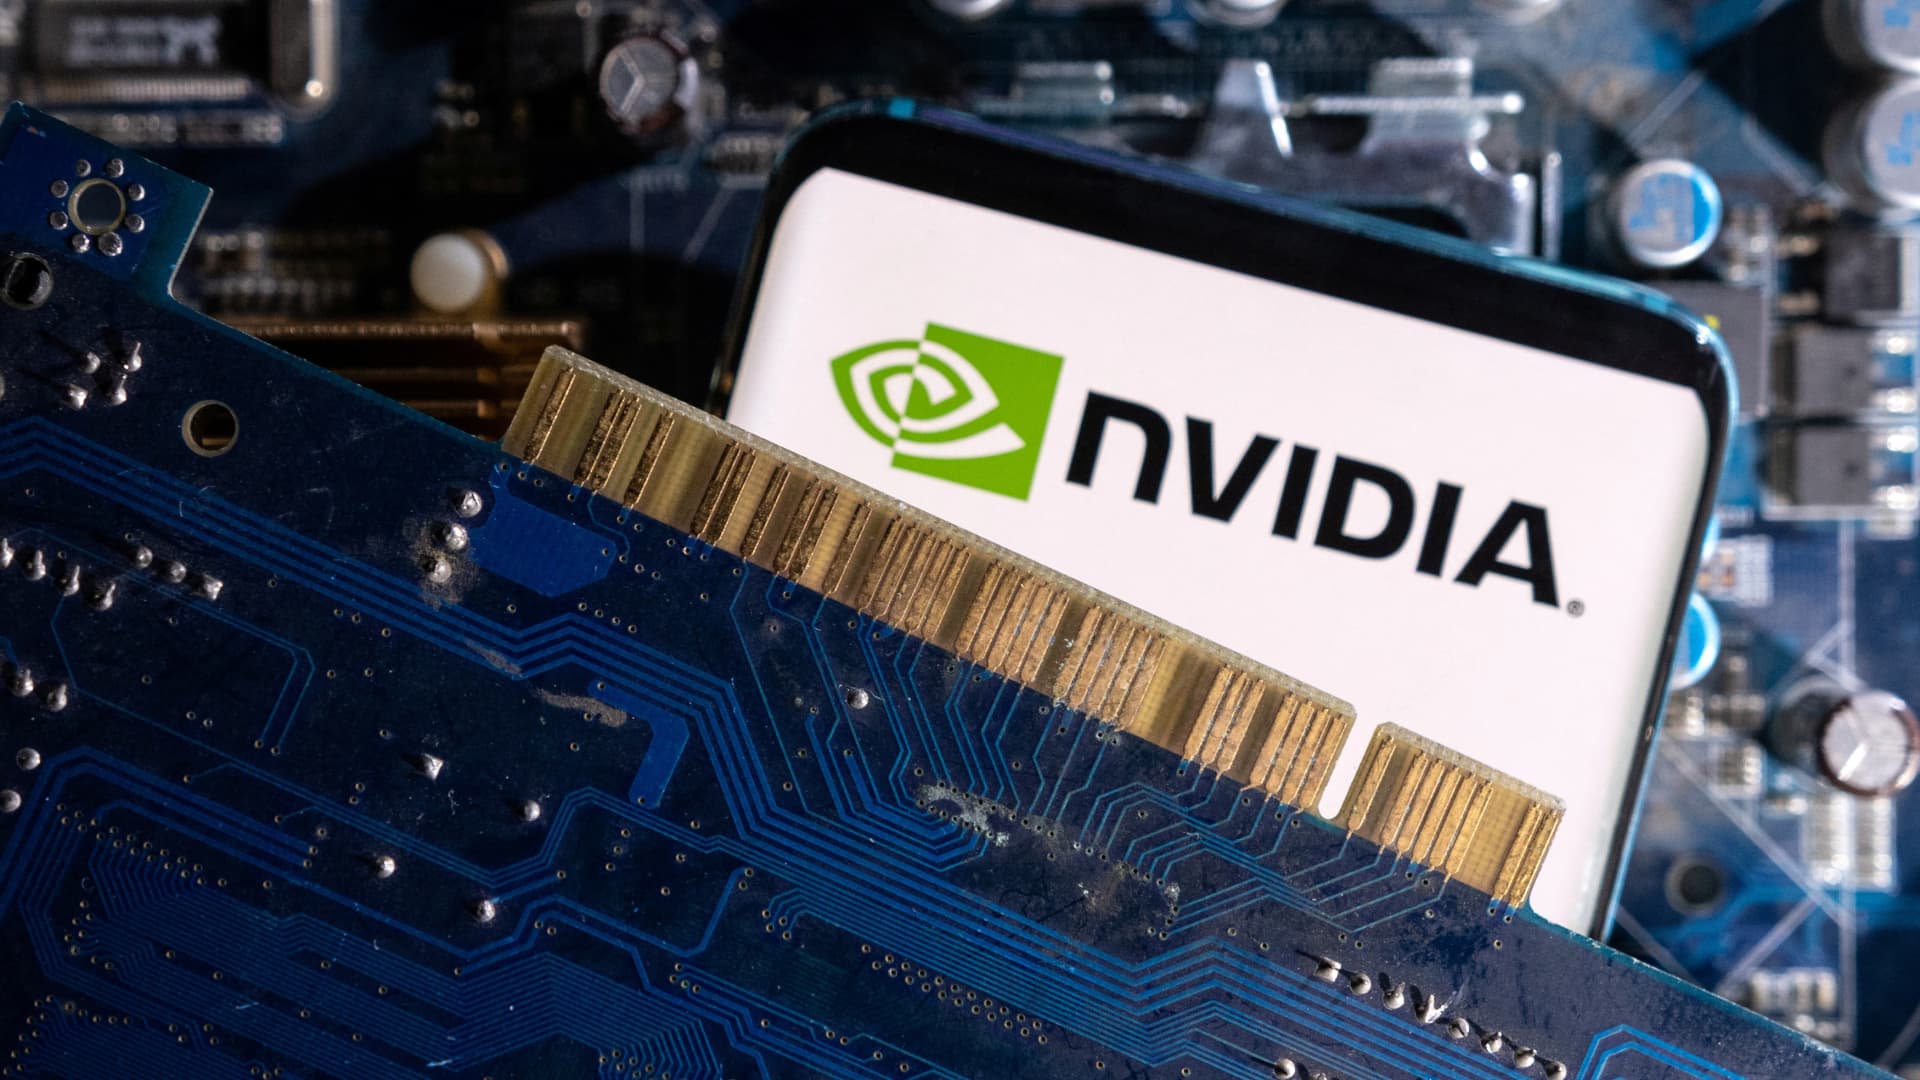 Stocks making the biggest moves midday: Nvidia, Marvell Technology, Costco, Eli Lilly and more